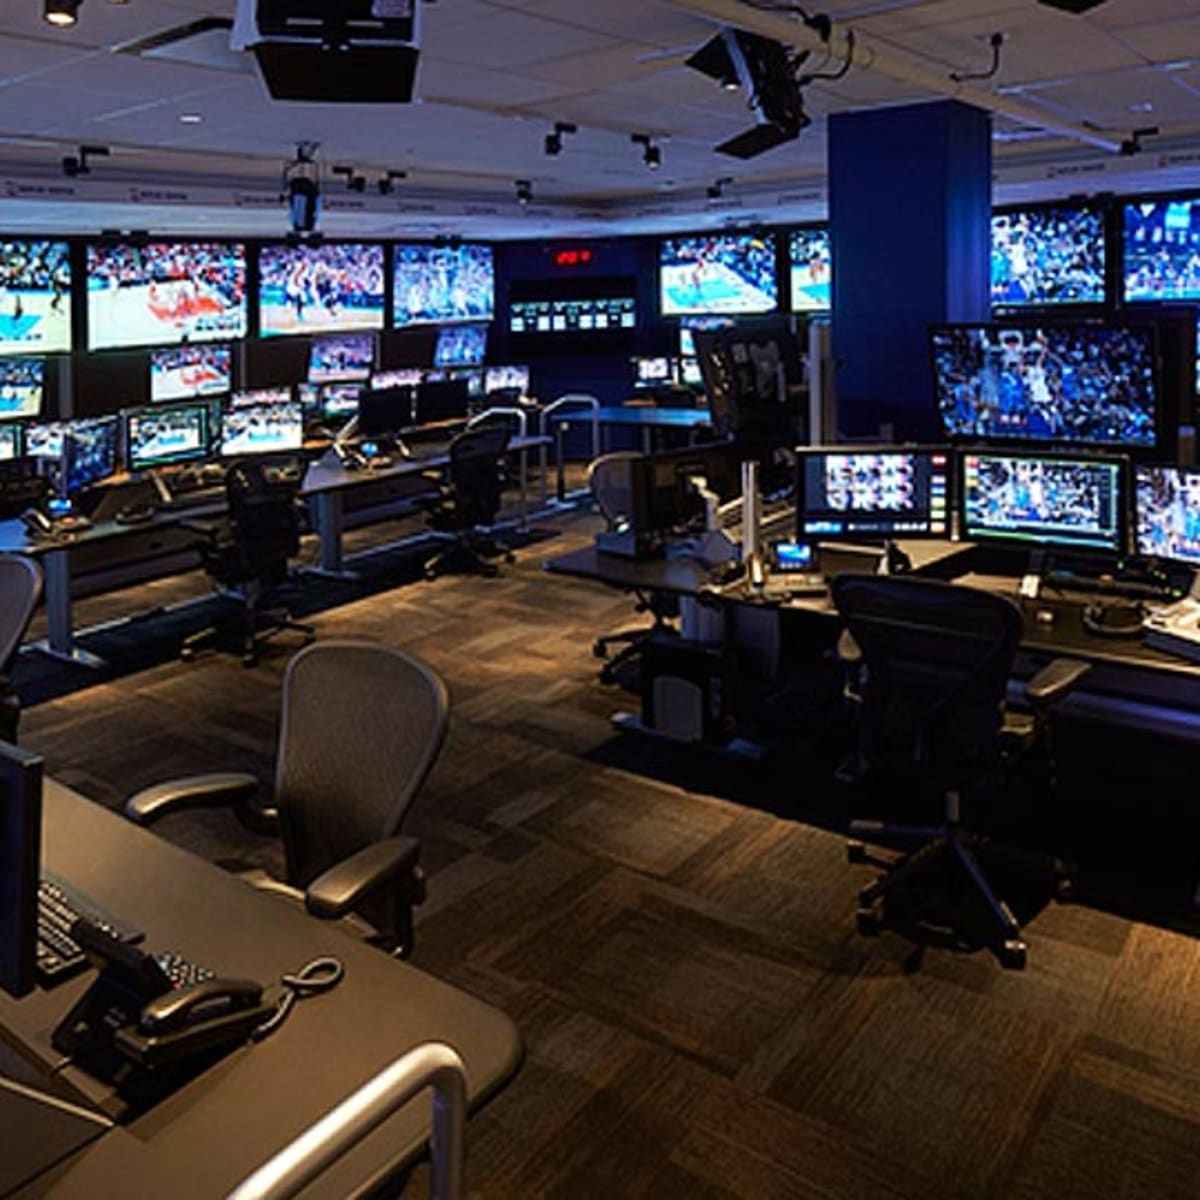 NBAs new centralized replay system will help speed up game